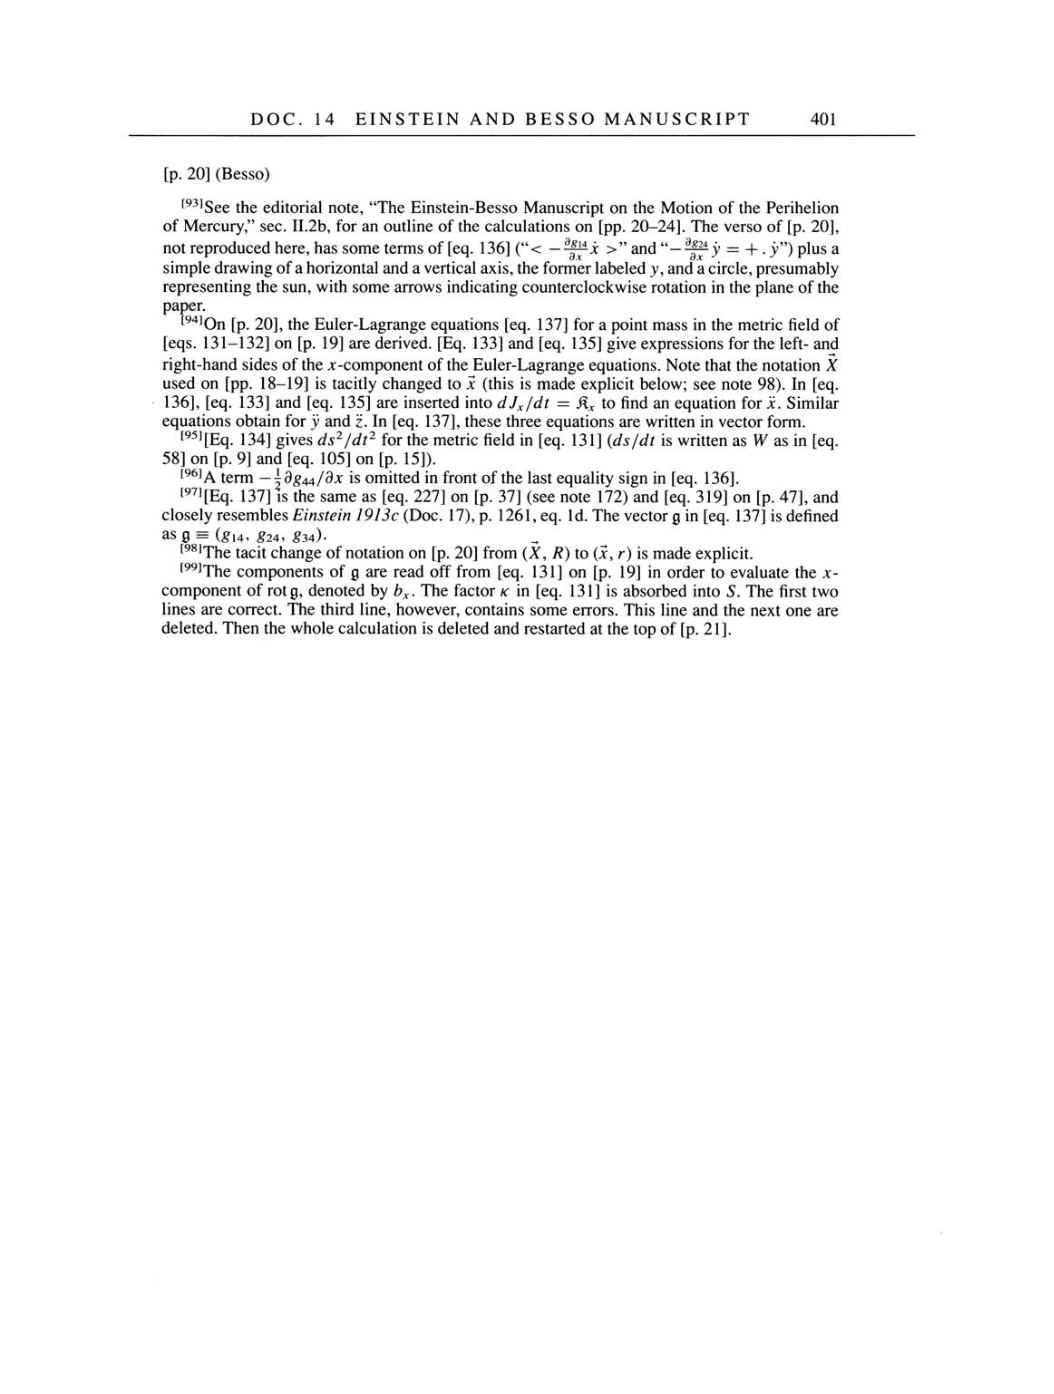 Volume 4: The Swiss Years: Writings 1912-1914 page 401